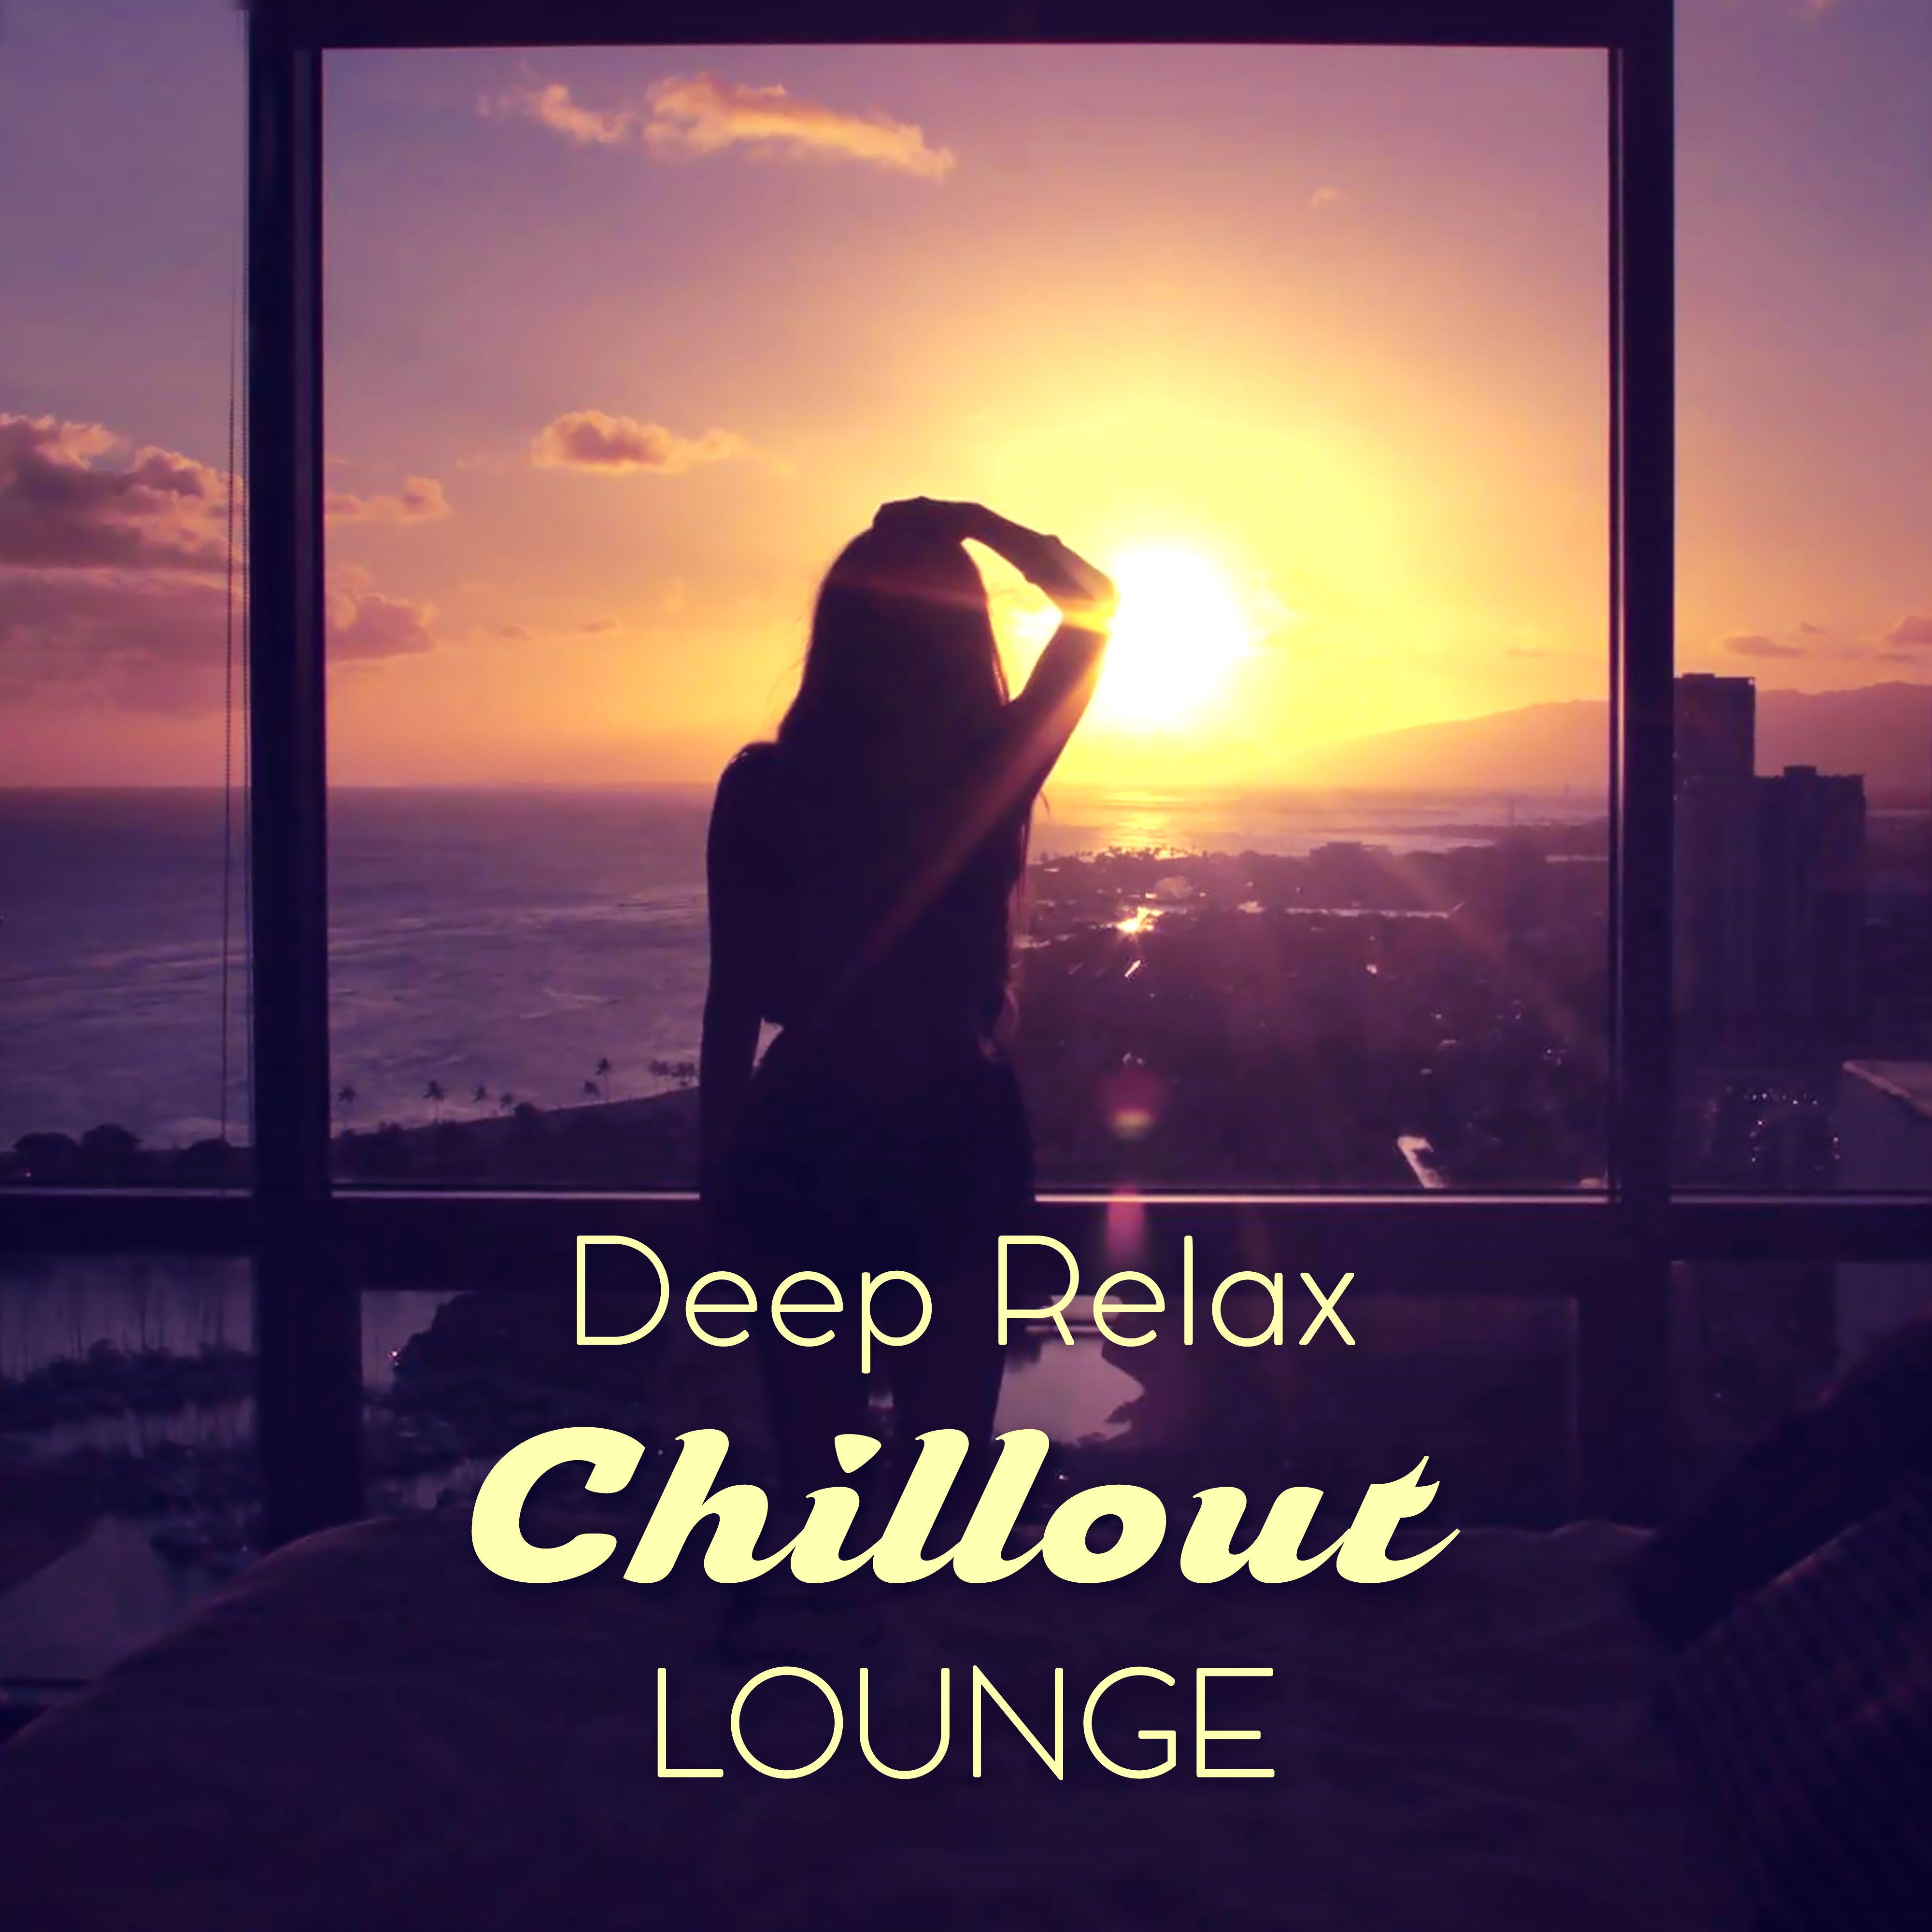 Deep Relax Chillout Lounge – Chillout Lounge Music, Electronic Sounds, Happy Chill, Dance Party